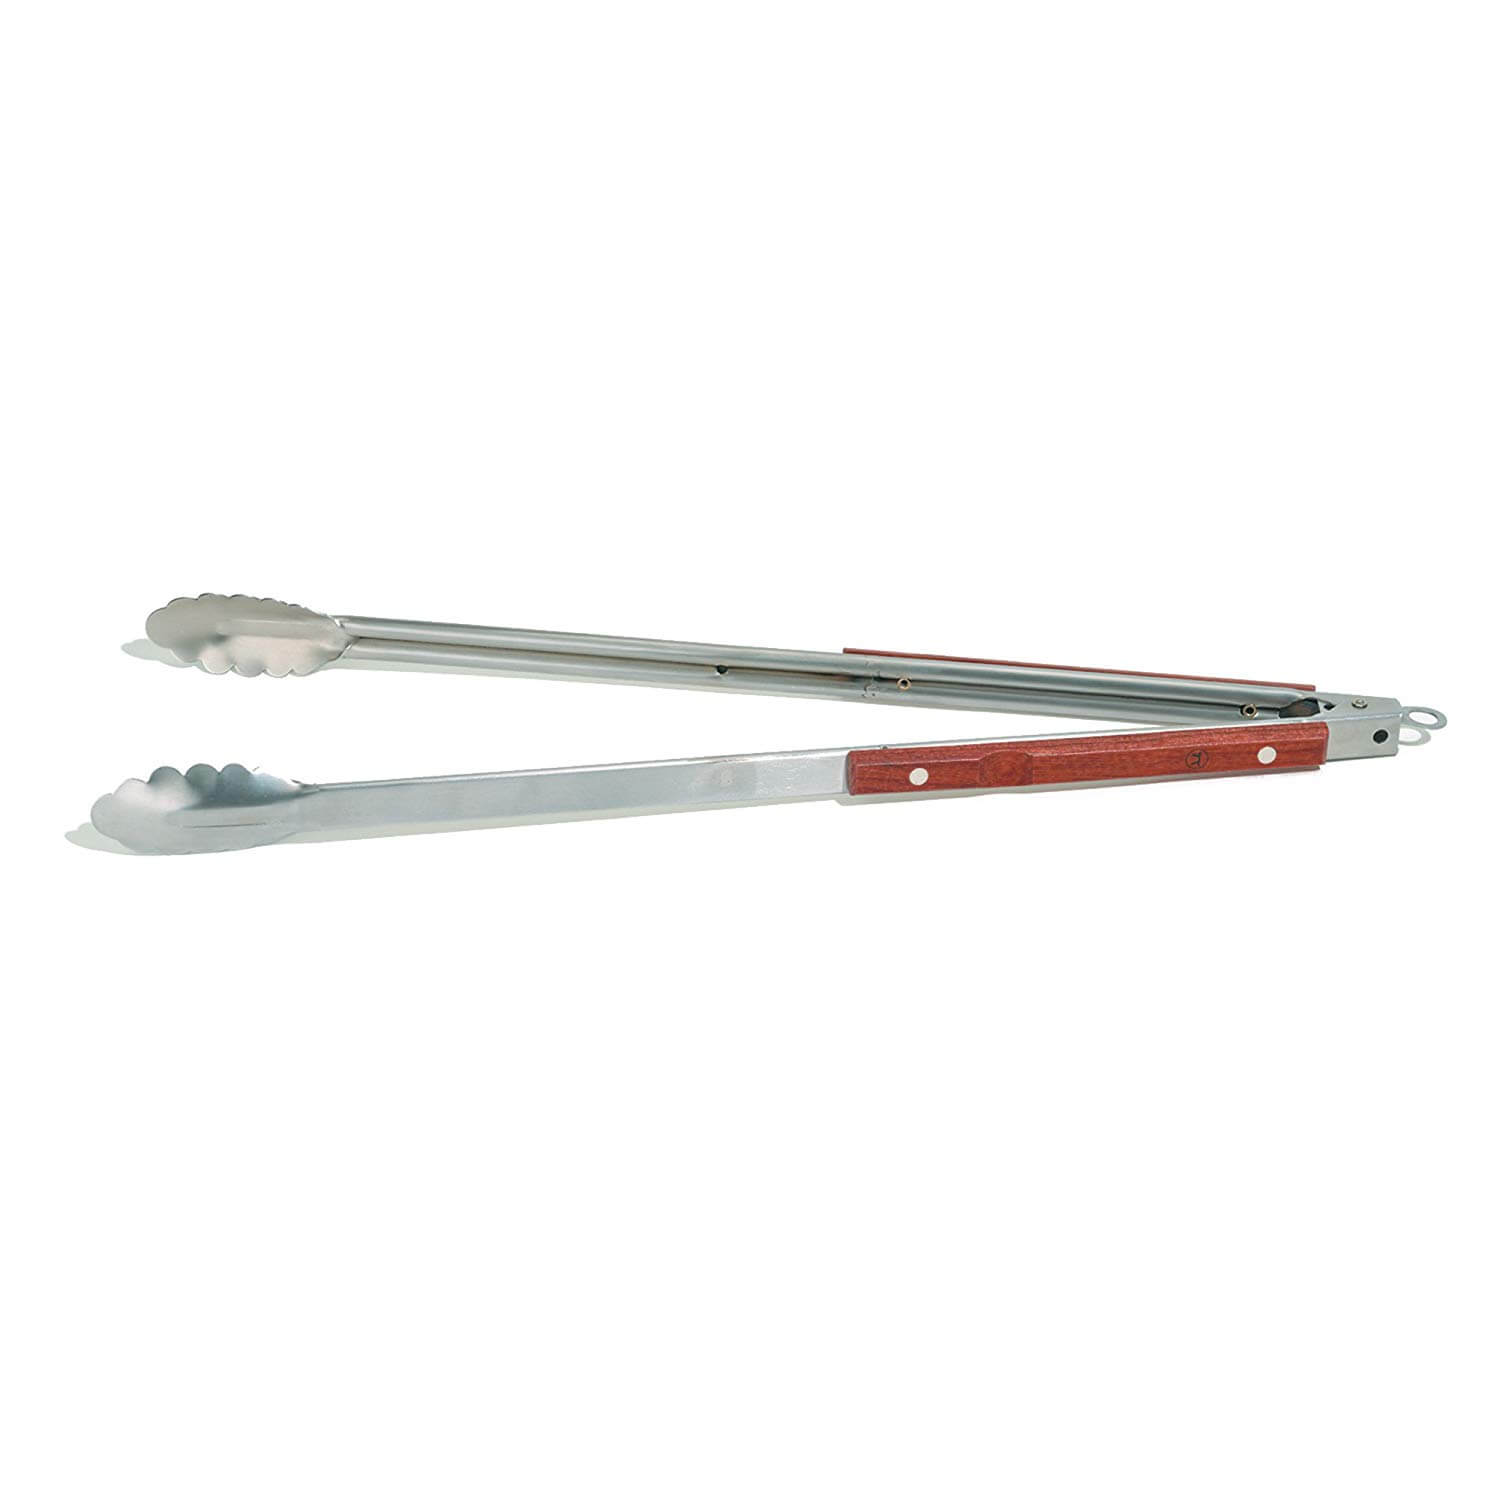 Outset QB22 Rosewood Collection Extra-Long Locking Tongs